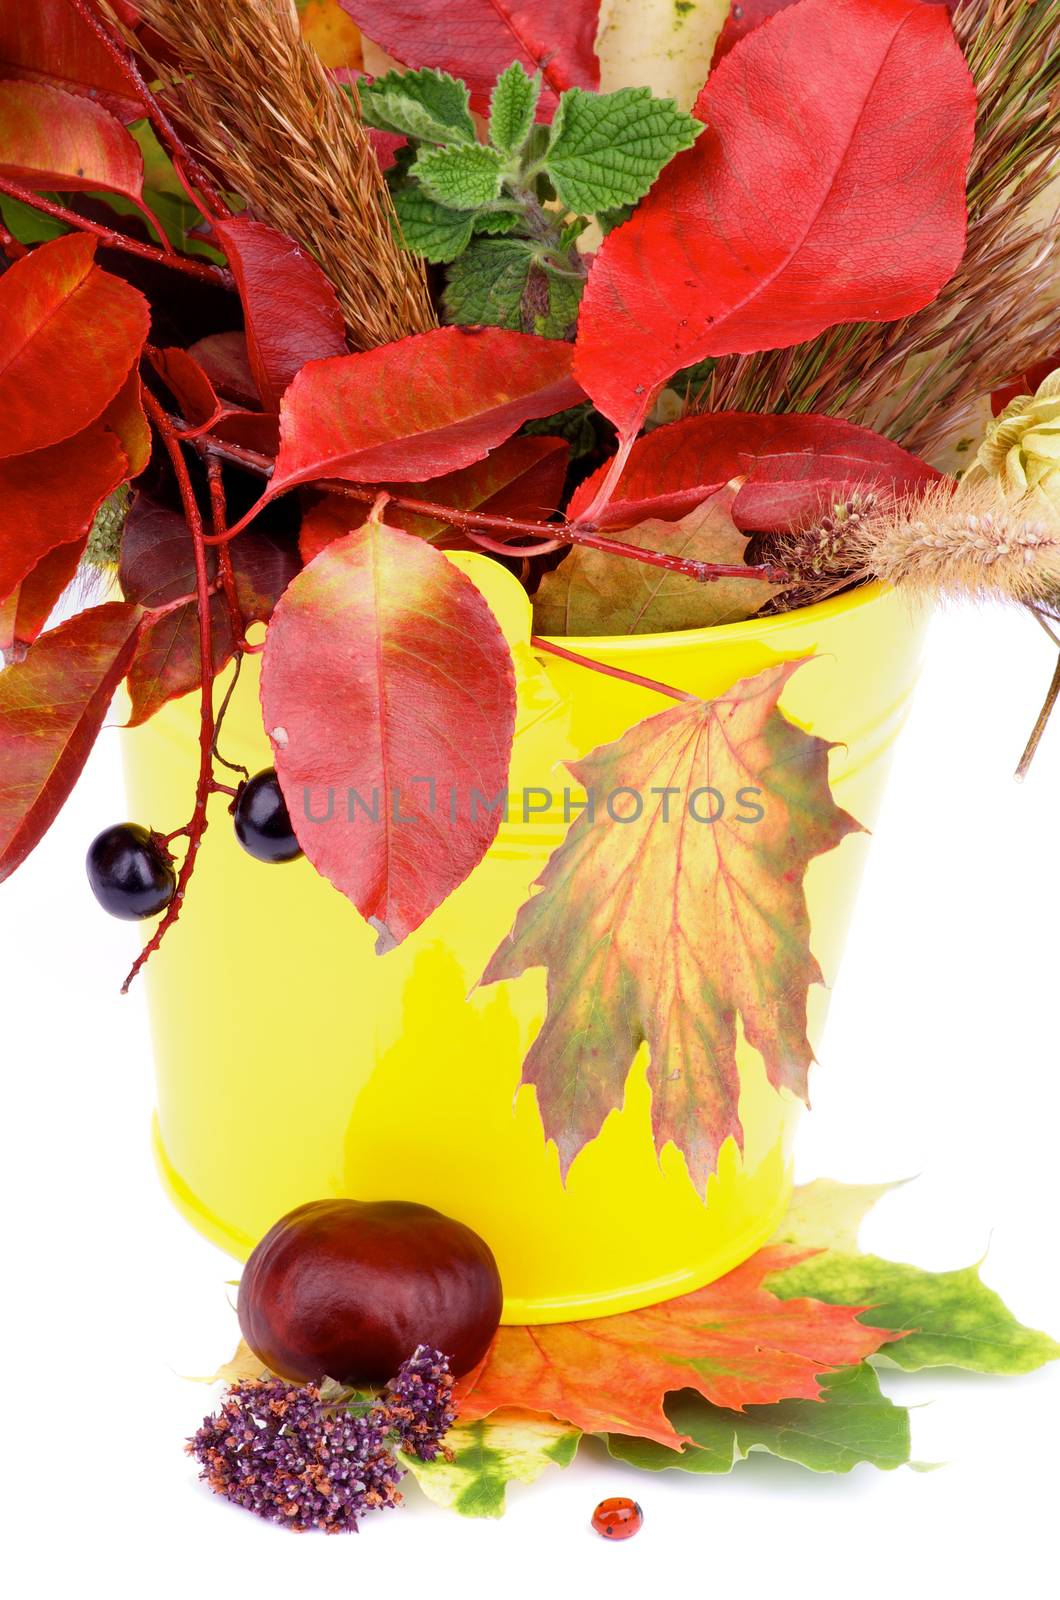 Arrangement of Autumn Leafs, Dry Grass, Green Hop Cones and Berries in Yellow Bucket with Ladybug isolated on white background